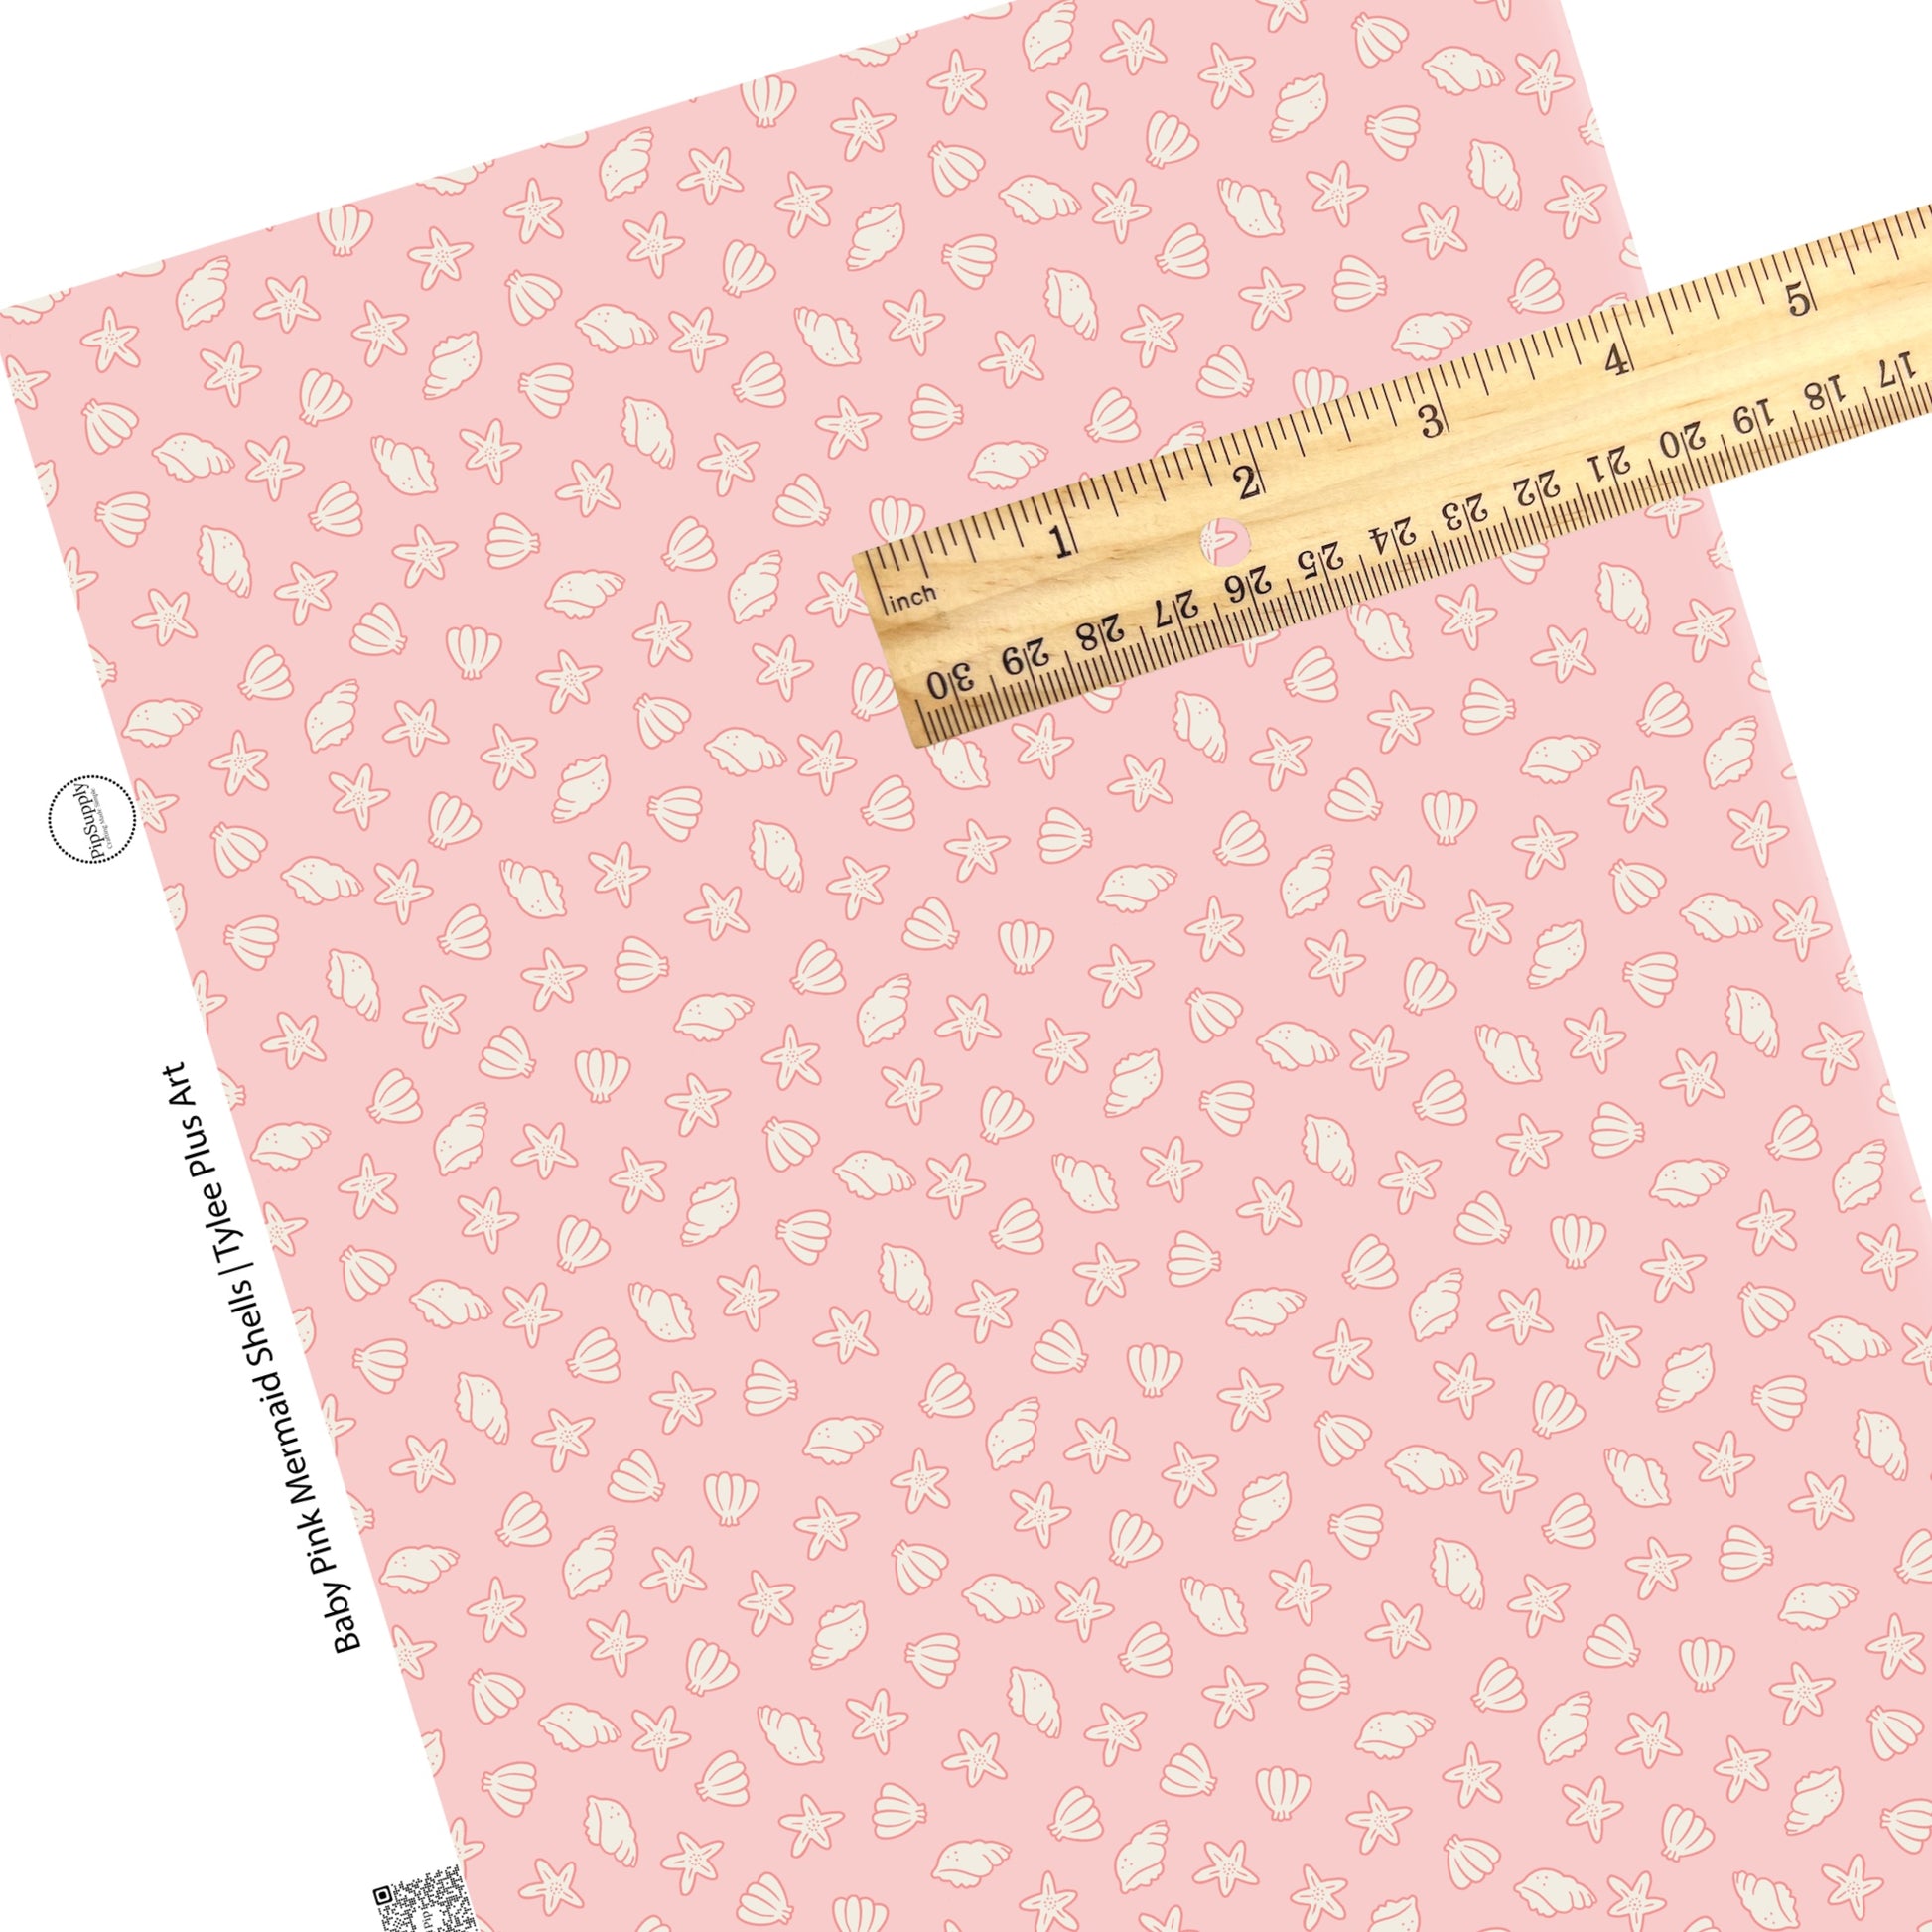 These beach faux leather sheets contain the following design elements: seashells on light pink. Our CPSIA compliant faux leather sheets or rolls can be used for all types of crafting projects.